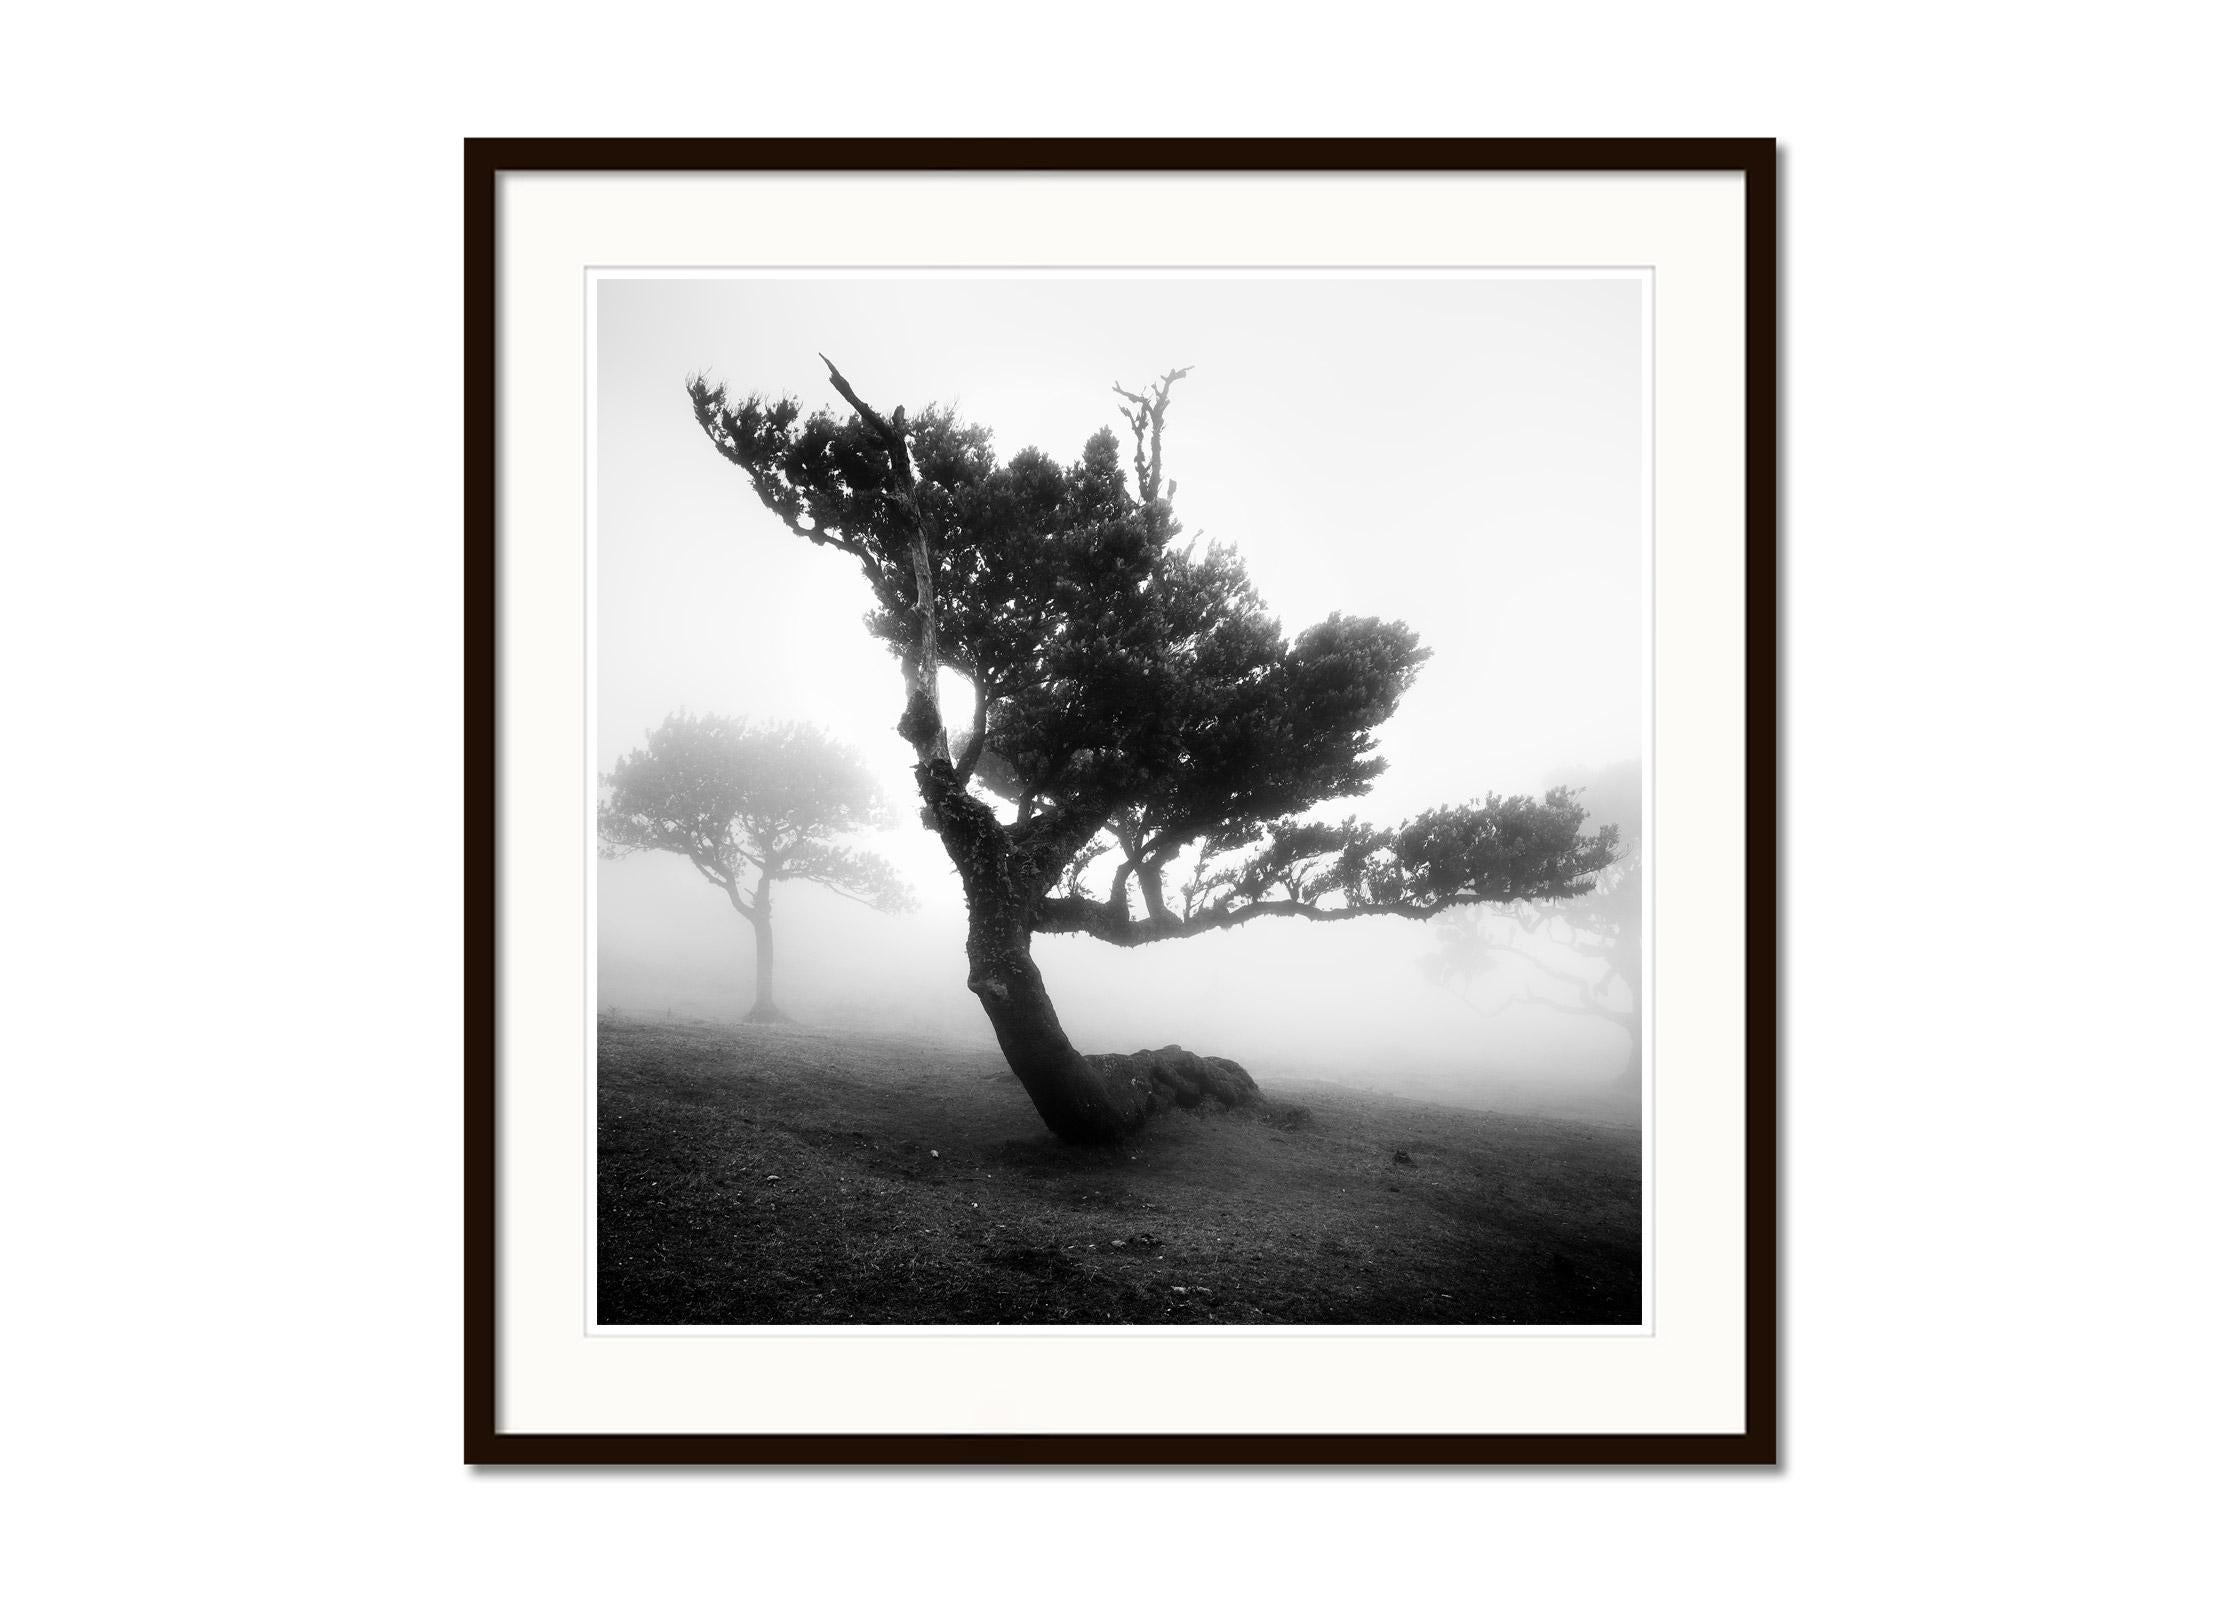 Black and white fine art landscape photography. Archival pigment ink print, edition of 7. Signed, titled, dated and numbered by artist. Certificate of authenticity included. Printed with 4cm white border.
International award winner photographer